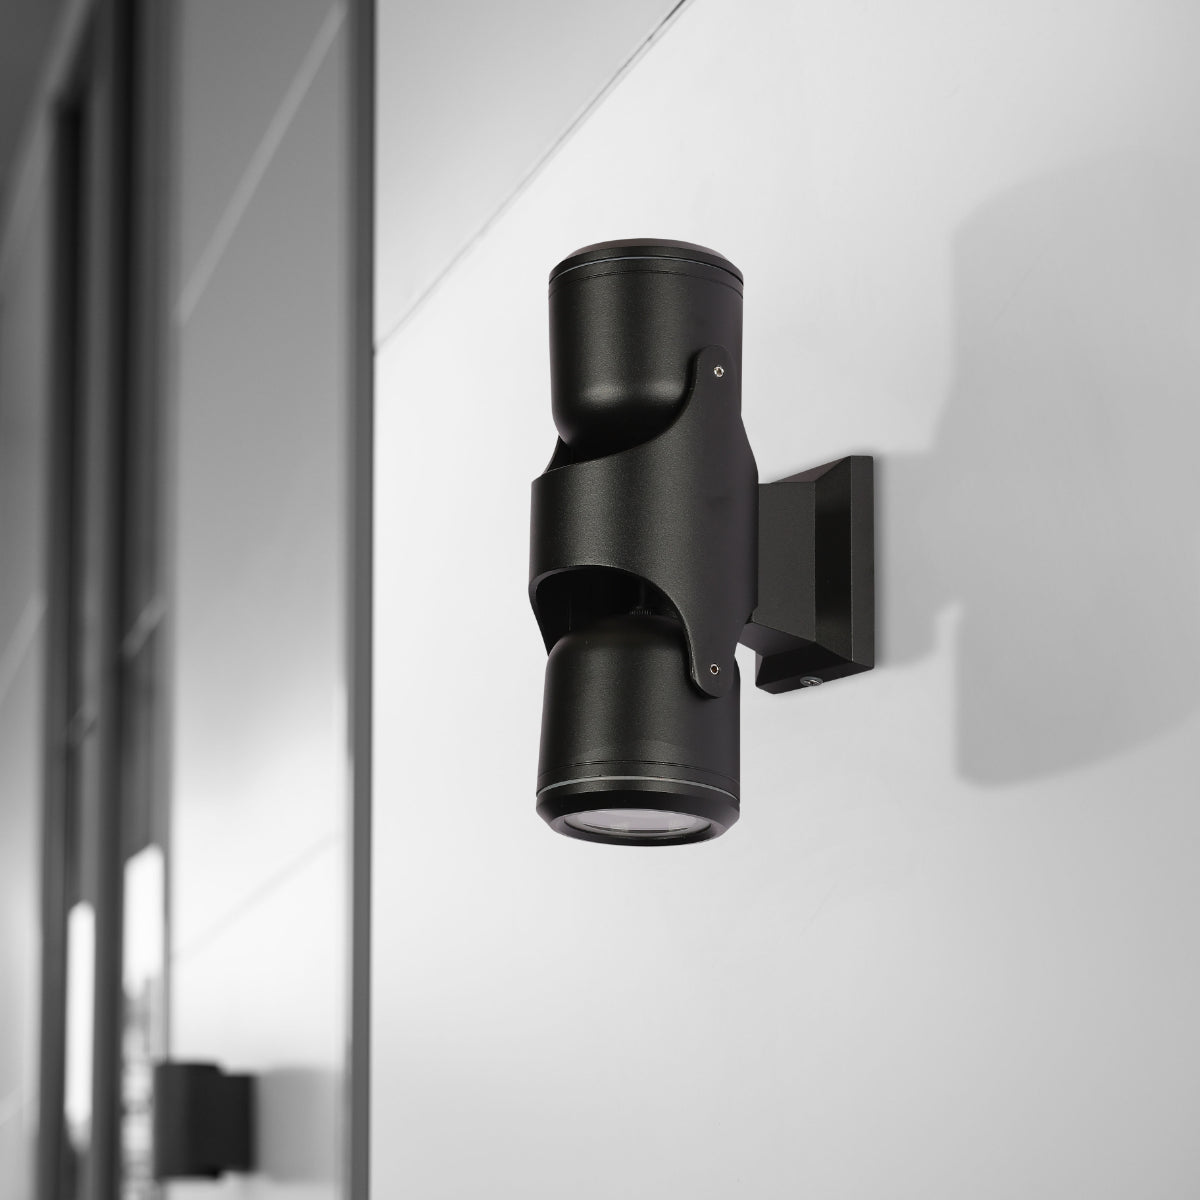 Where to use Up Down Tiltable Outdoor Wall Light GU10 Black 182-03412